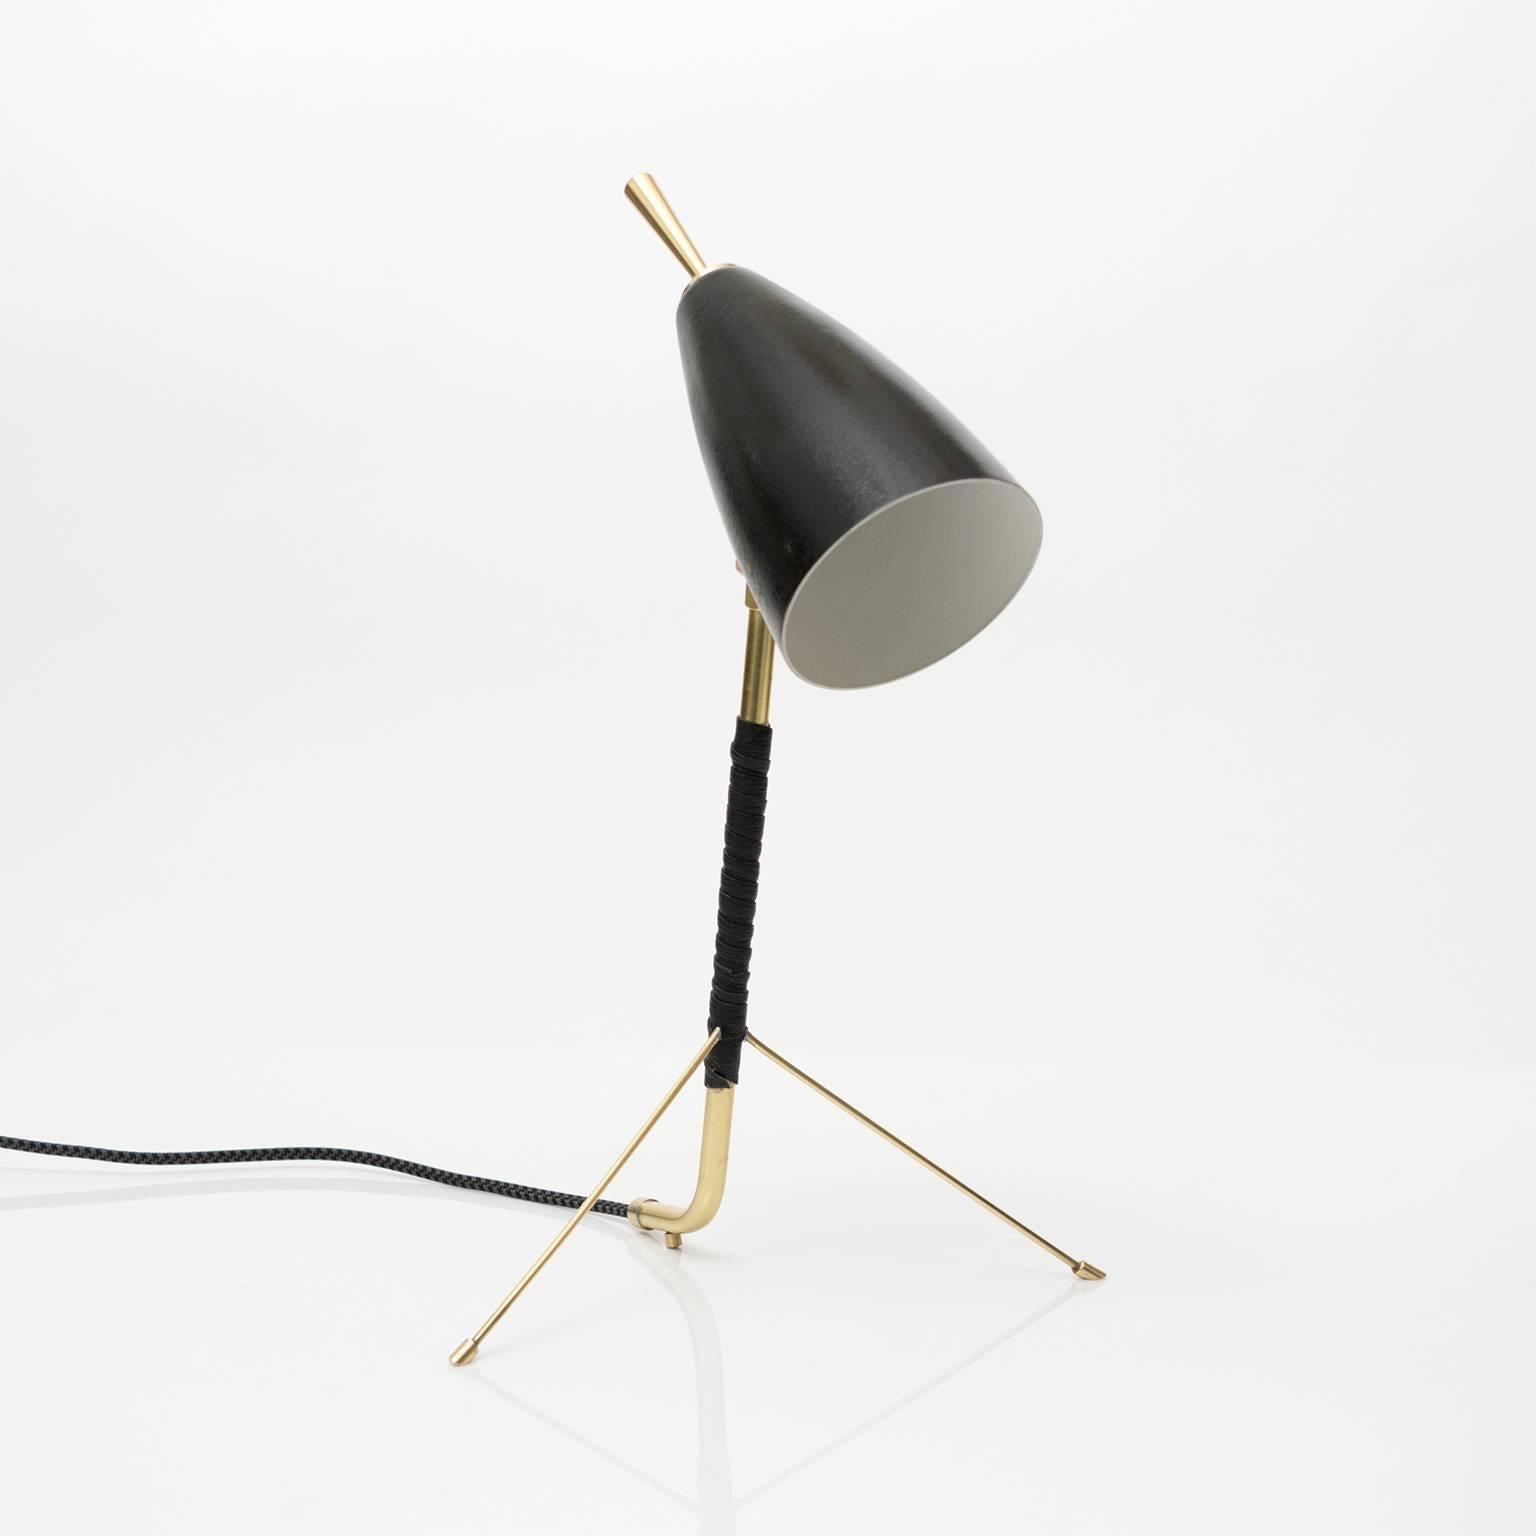 Scandinavian modern small desk lamp made with polished brass, black lacquered metal and a leather wrapped stem. Newly rewired with one candelabra base socket.
 
Measures: Height 13.5“, depth 8”.